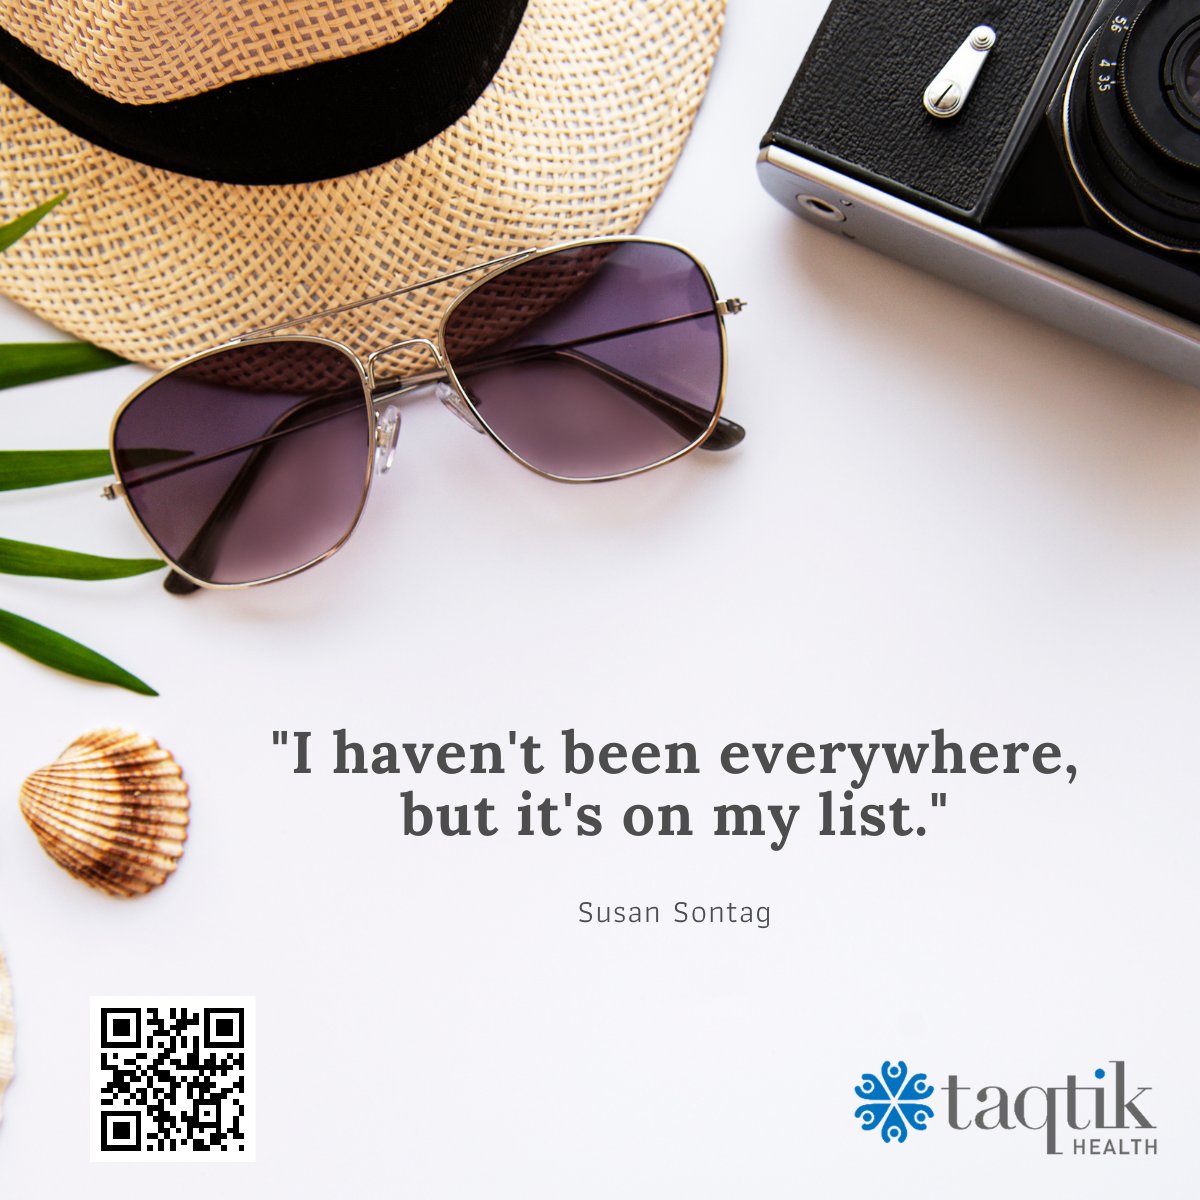 #RT @taqtikhealth: 👣'I haven't been everywhere, but it's on my list.' - Susan Sontag

#medicaltravel #medicaltourism #healthcare #healthtourism #health #plasticsurgery #medical  #healthcheck #healthprevention #fertility #travel  #wellness #wellnessto…